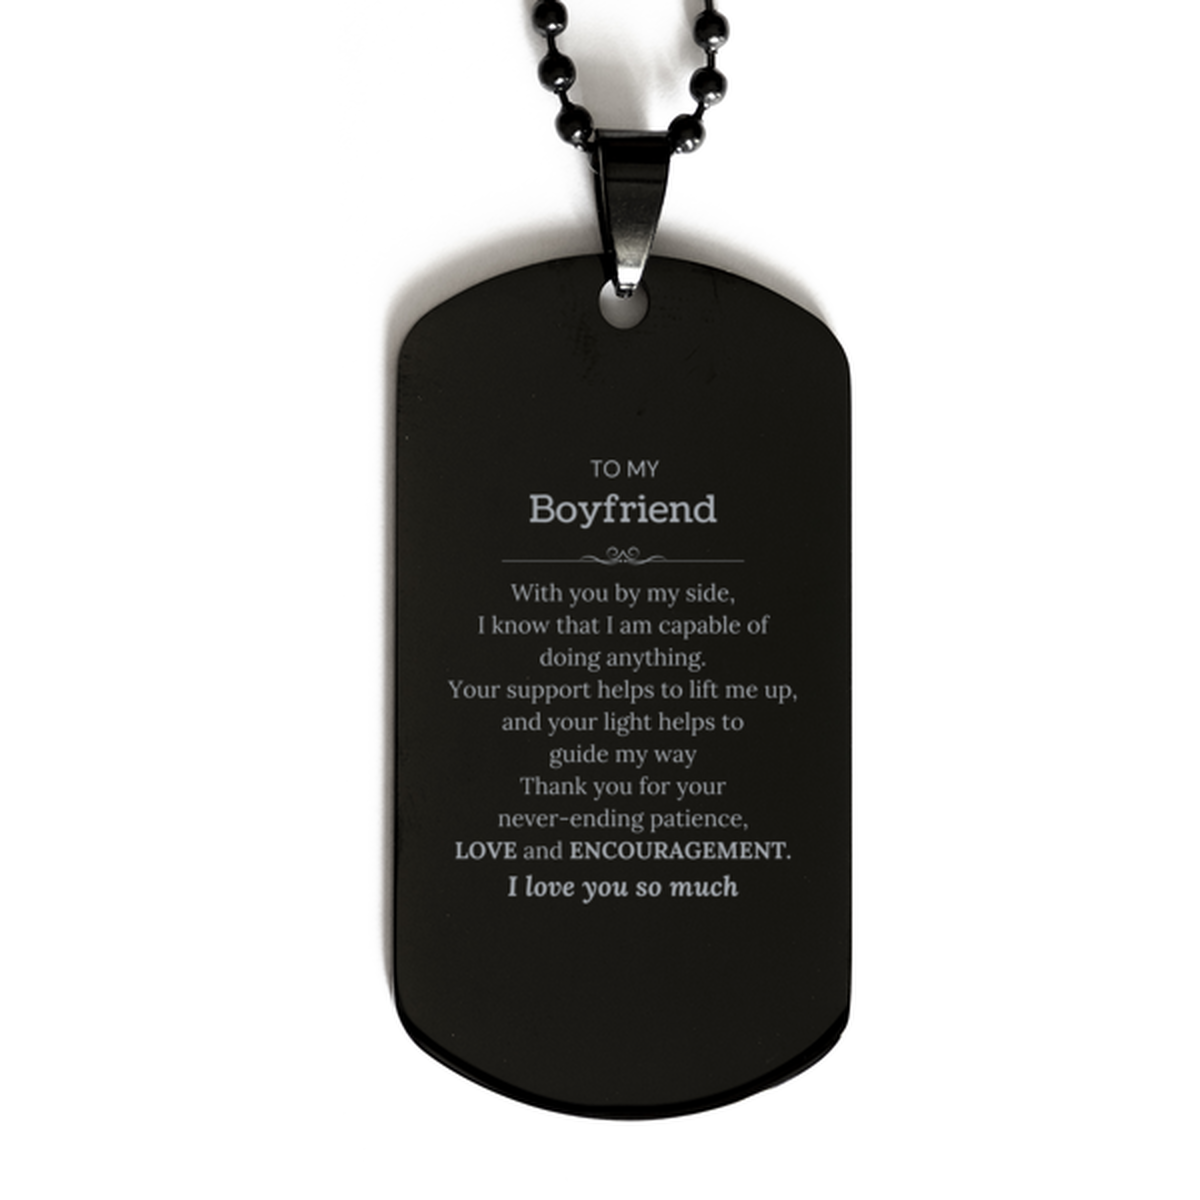 Appreciation Boyfriend Black Dog Tag Gifts, To My Boyfriend Birthday Christmas Wedding Keepsake Gifts for Boyfriend With you by my side, I know that I am capable of doing anything. I love you so much